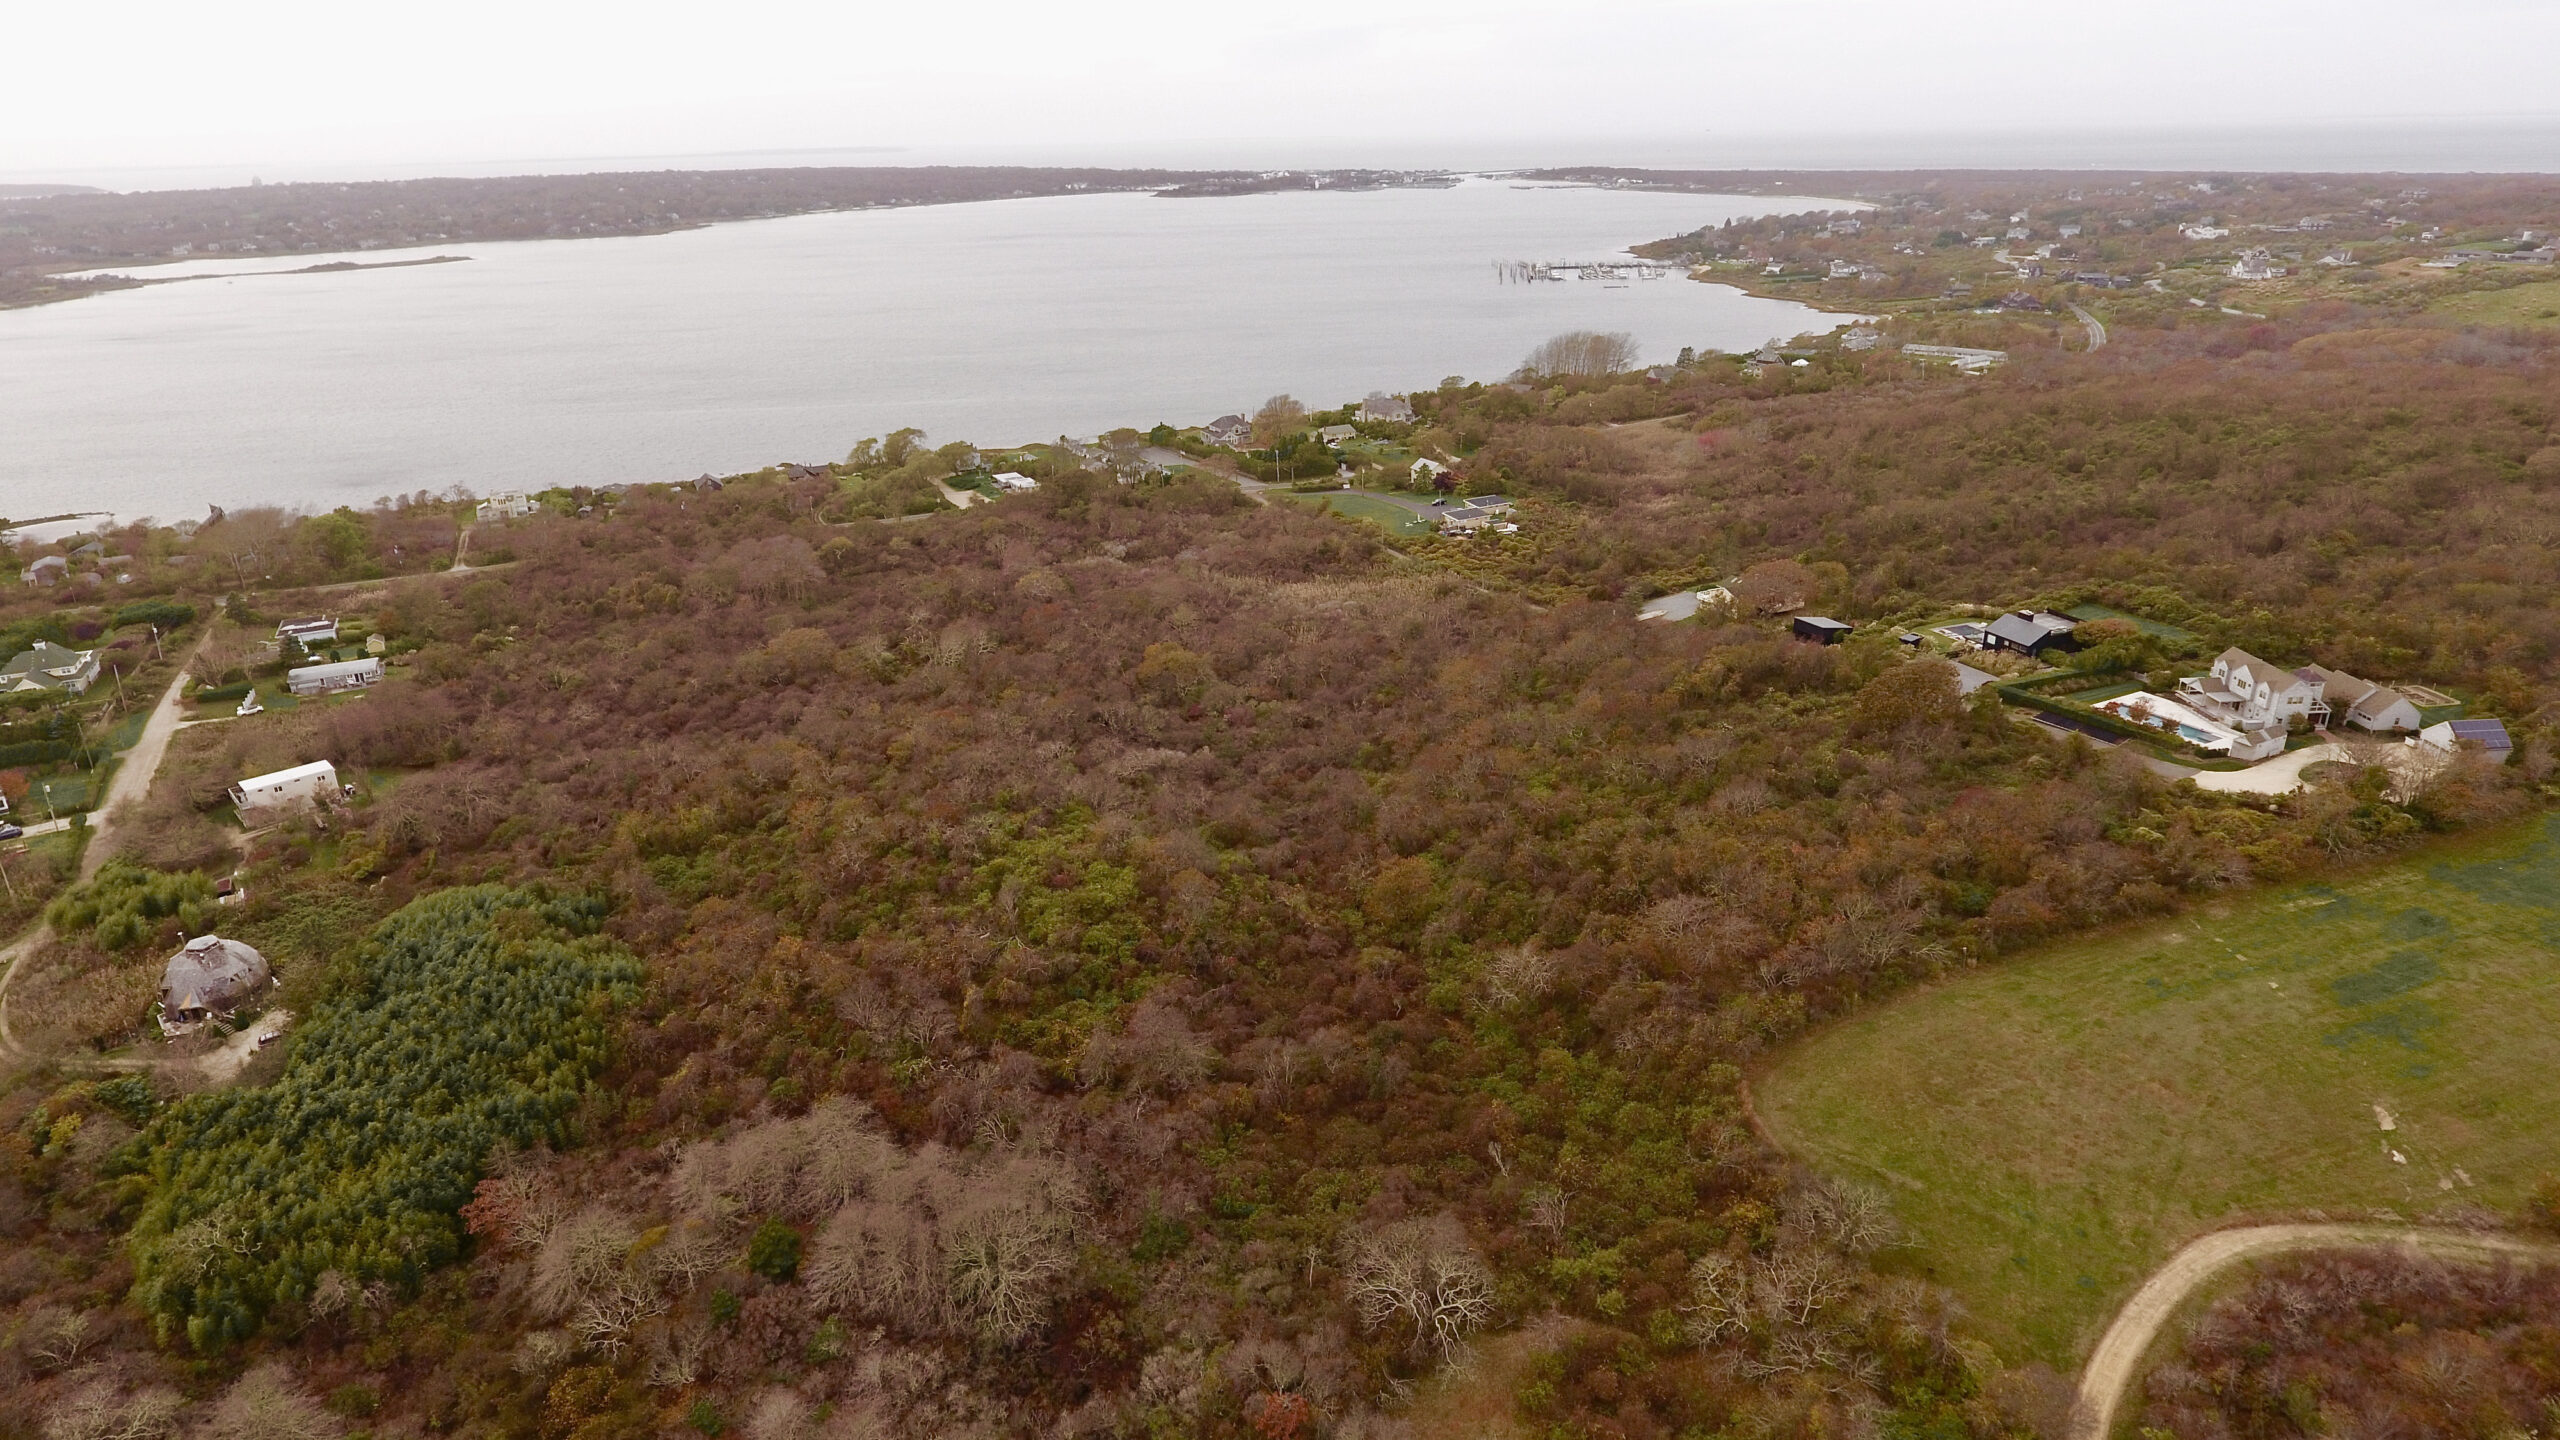 East Hampton Town plans to purchase 18.8 acres of open land off East Lake Drive for $4.25 million. The deal is a steal, the Town Board has said. But critics say the town is planing to use the land in a swap with Suffolk County, give the land to the county in exchange for a parcel of land elsewhere, possibly in Hither Hills, where the town could put a sewage treatment system for the proposed downtown Montauk sewer system.